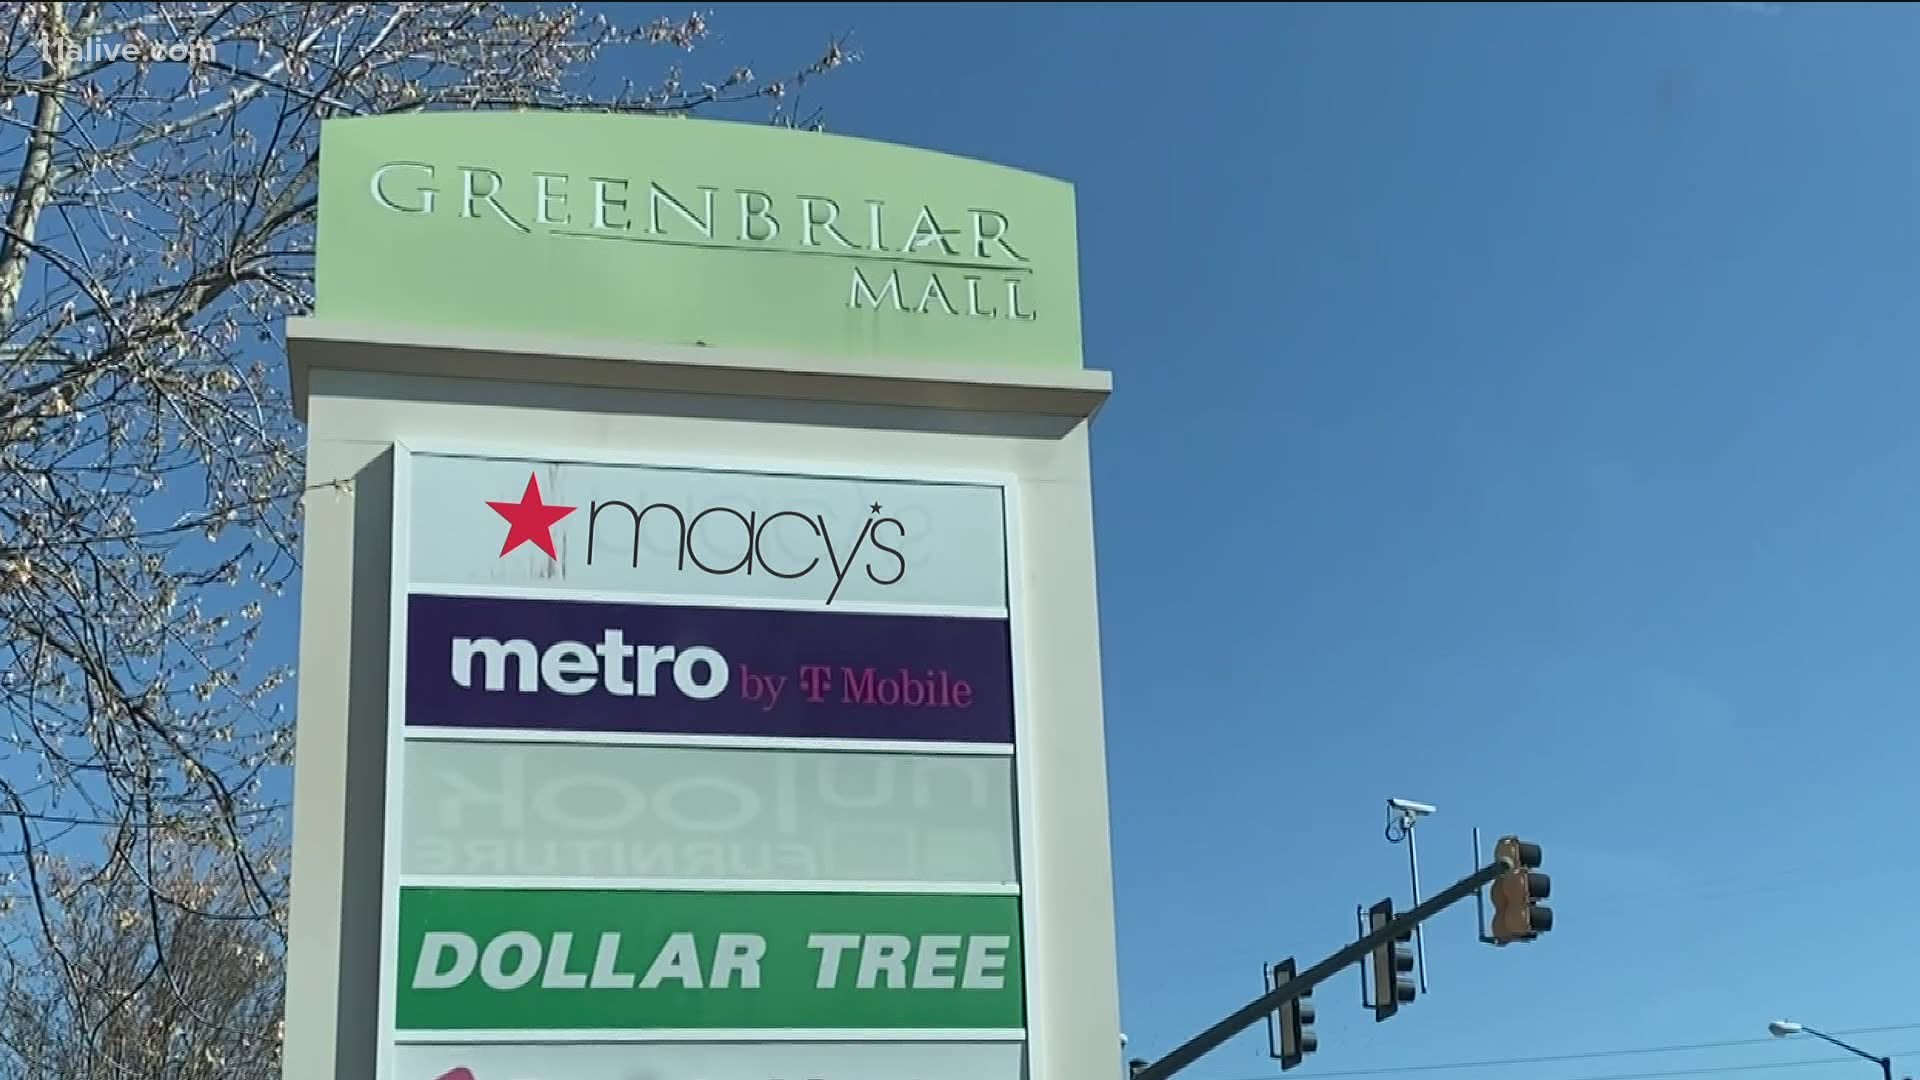 With the announcement of Macy’s closing its Greenbriar Mall location, there are concerns about the future of the shopping center.